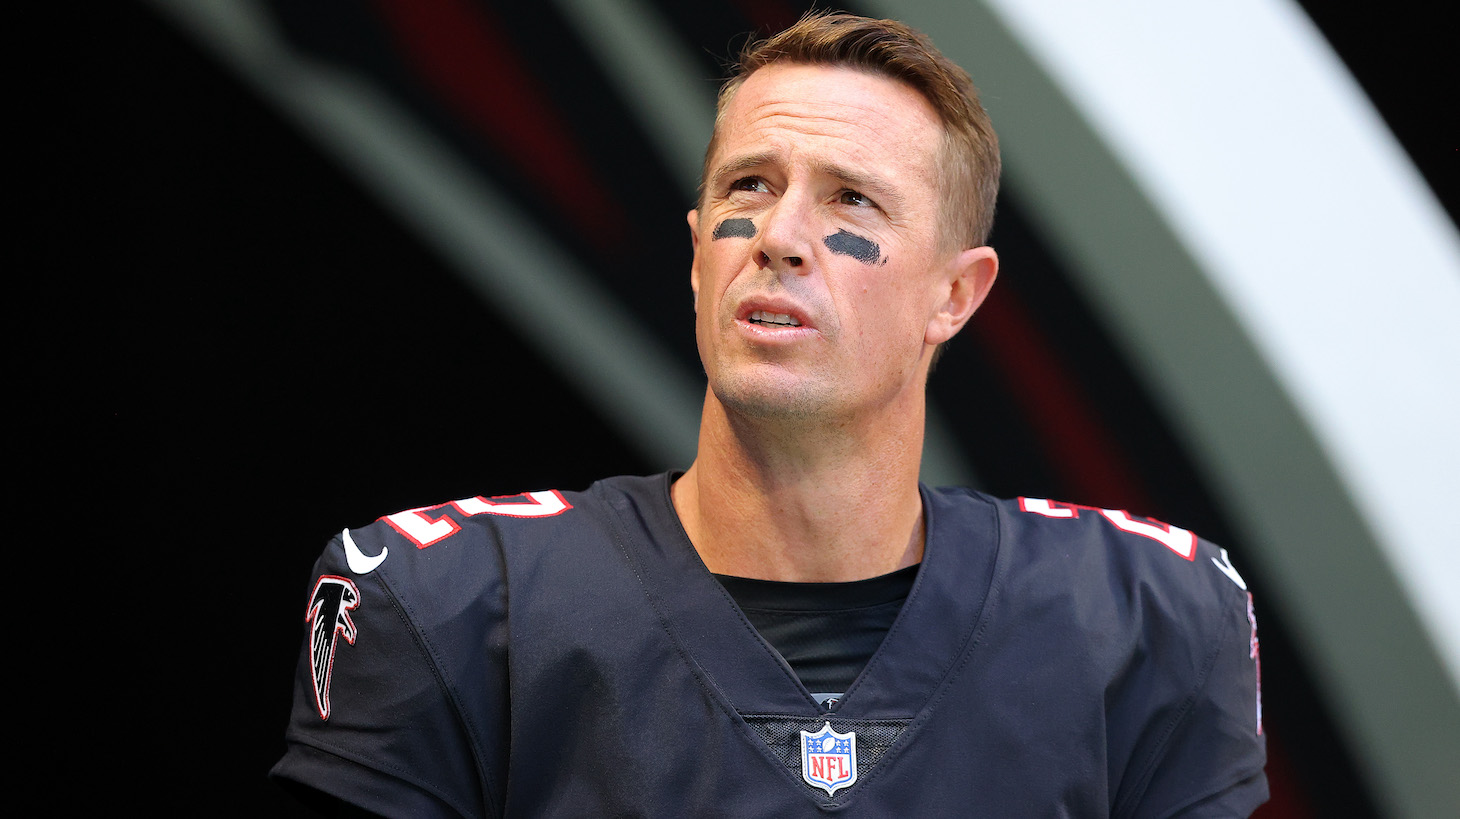 ATLANTA, GEORGIA - DECEMBER 26: Matt Ryan #2 of the Atlanta Falcons looks on during warm-up before the game against the Detroit Lions at Mercedes-Benz Stadium on December 26, 2021 in Atlanta, Georgia. (Photo by Todd Kirkland/Getty Images)